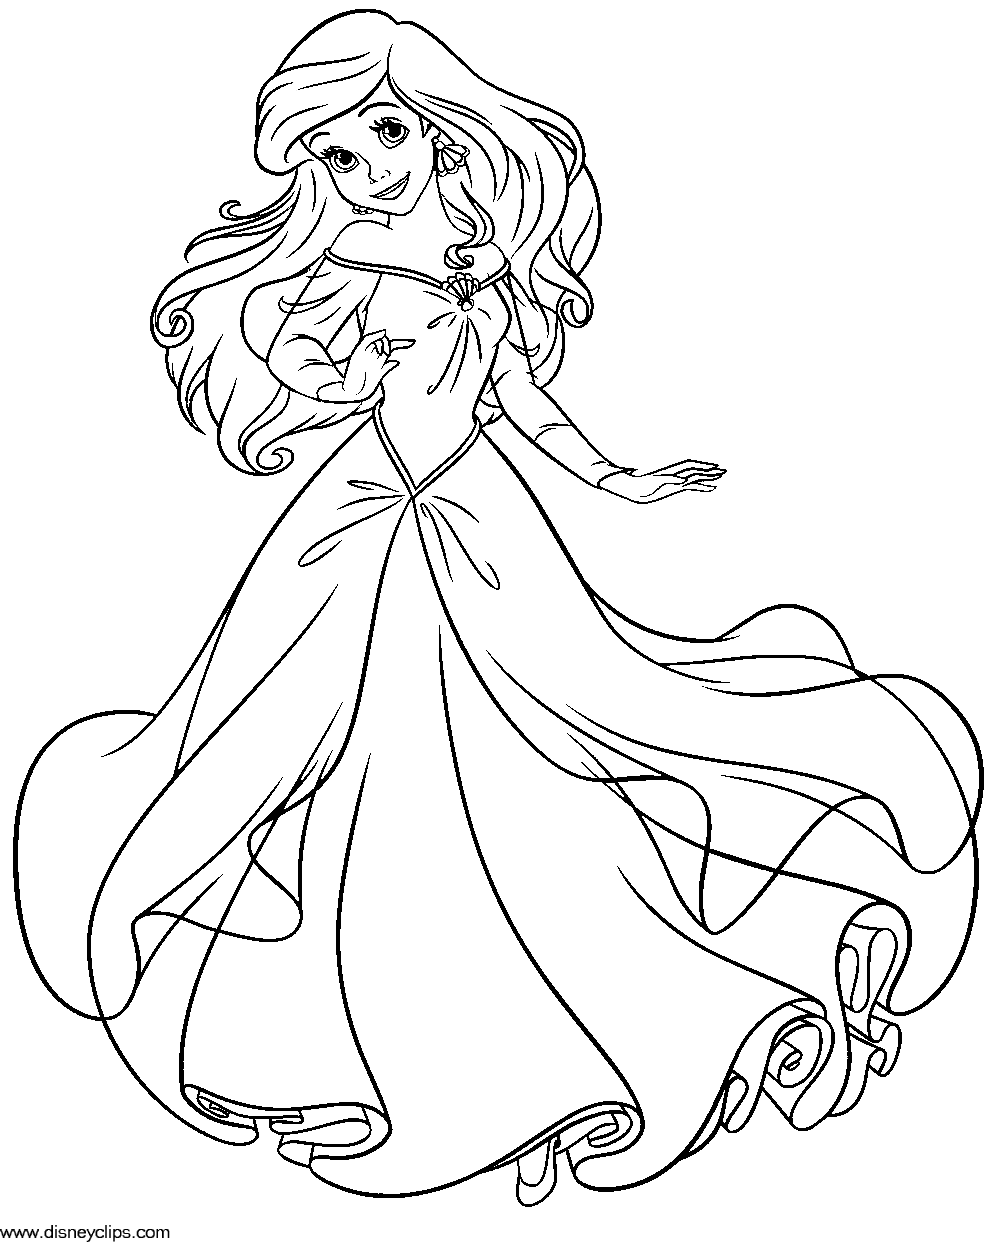 ariel the little mermaid coloring pages little mermaid coloring pages to download and print for free coloring the little mermaid ariel pages 